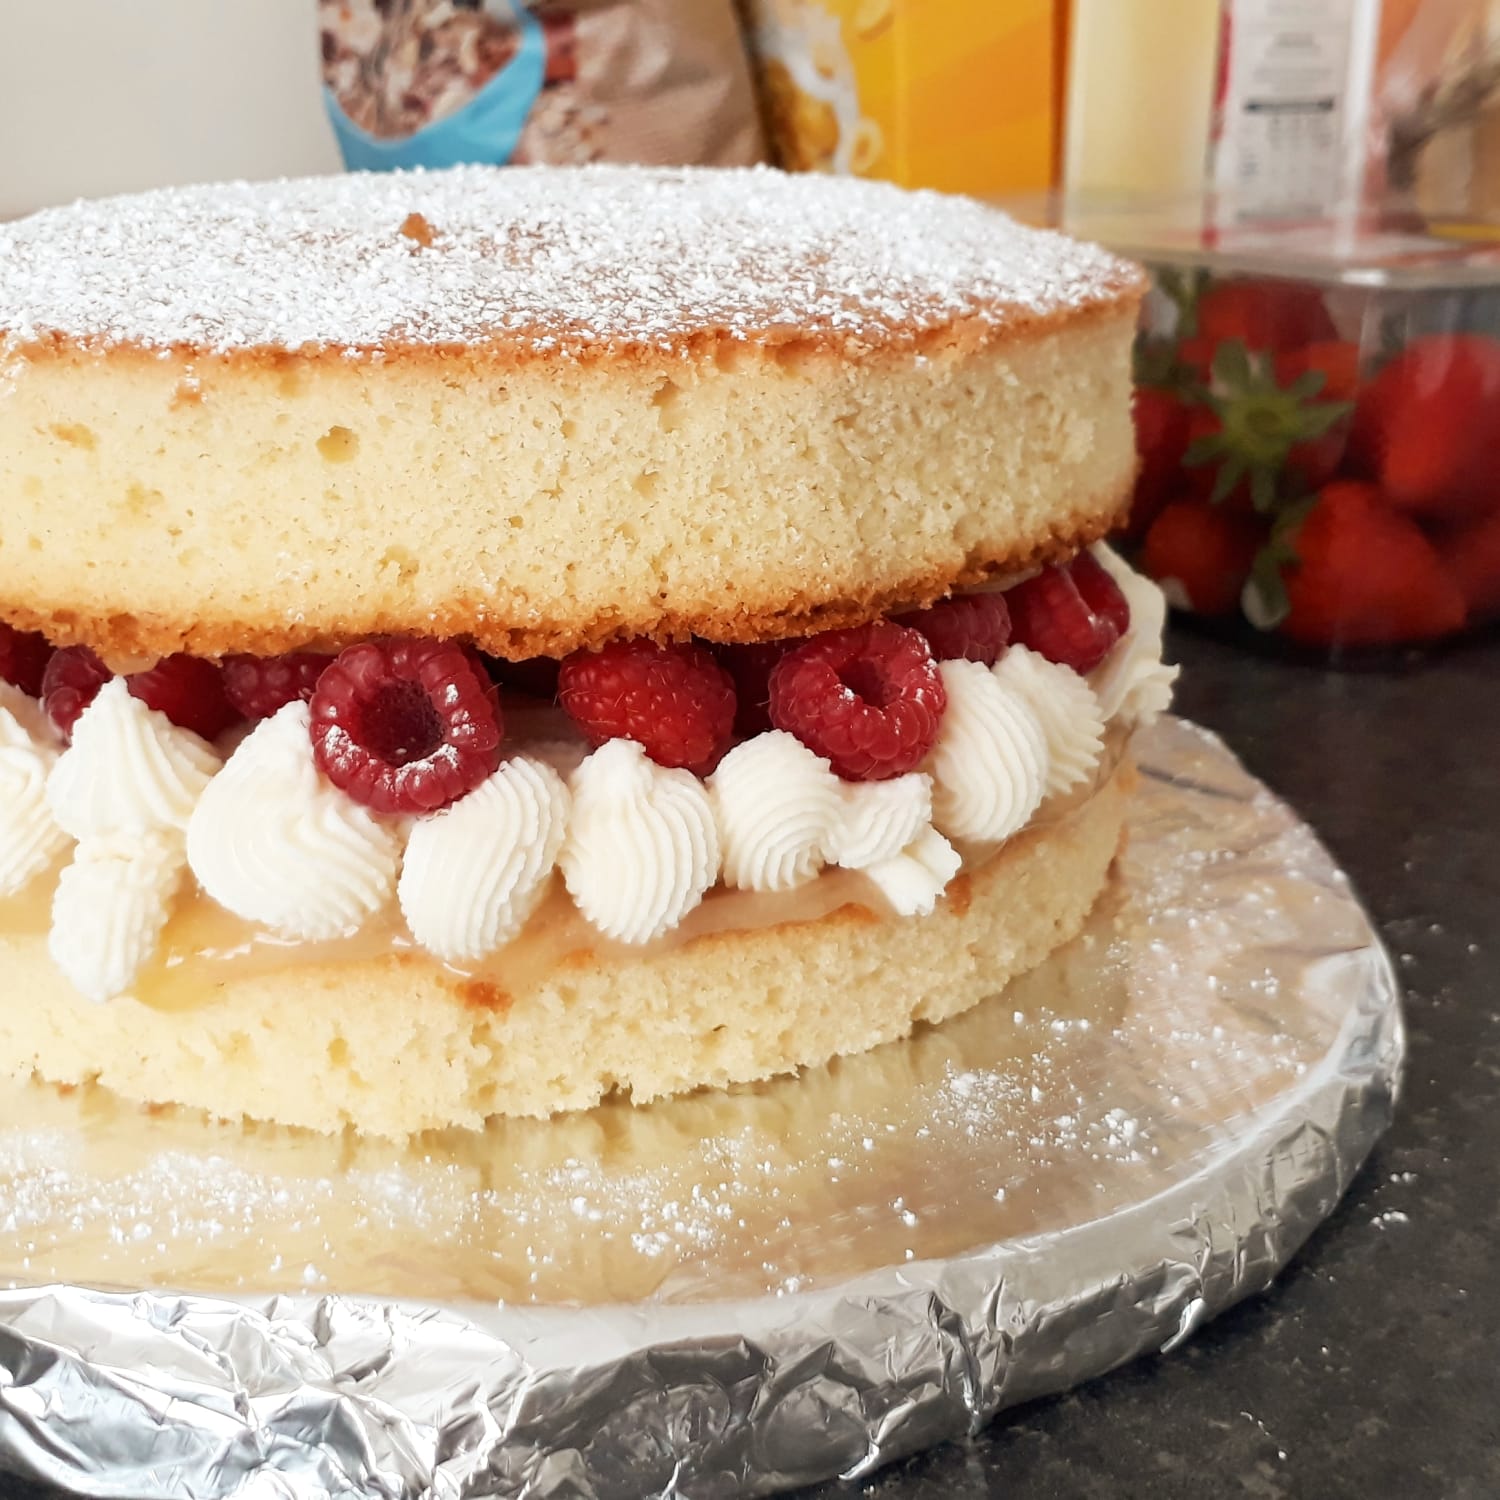 A different twist on the Victoria sponge: lemon curd, mascarpone icing, and raspberry filling 👌🏼